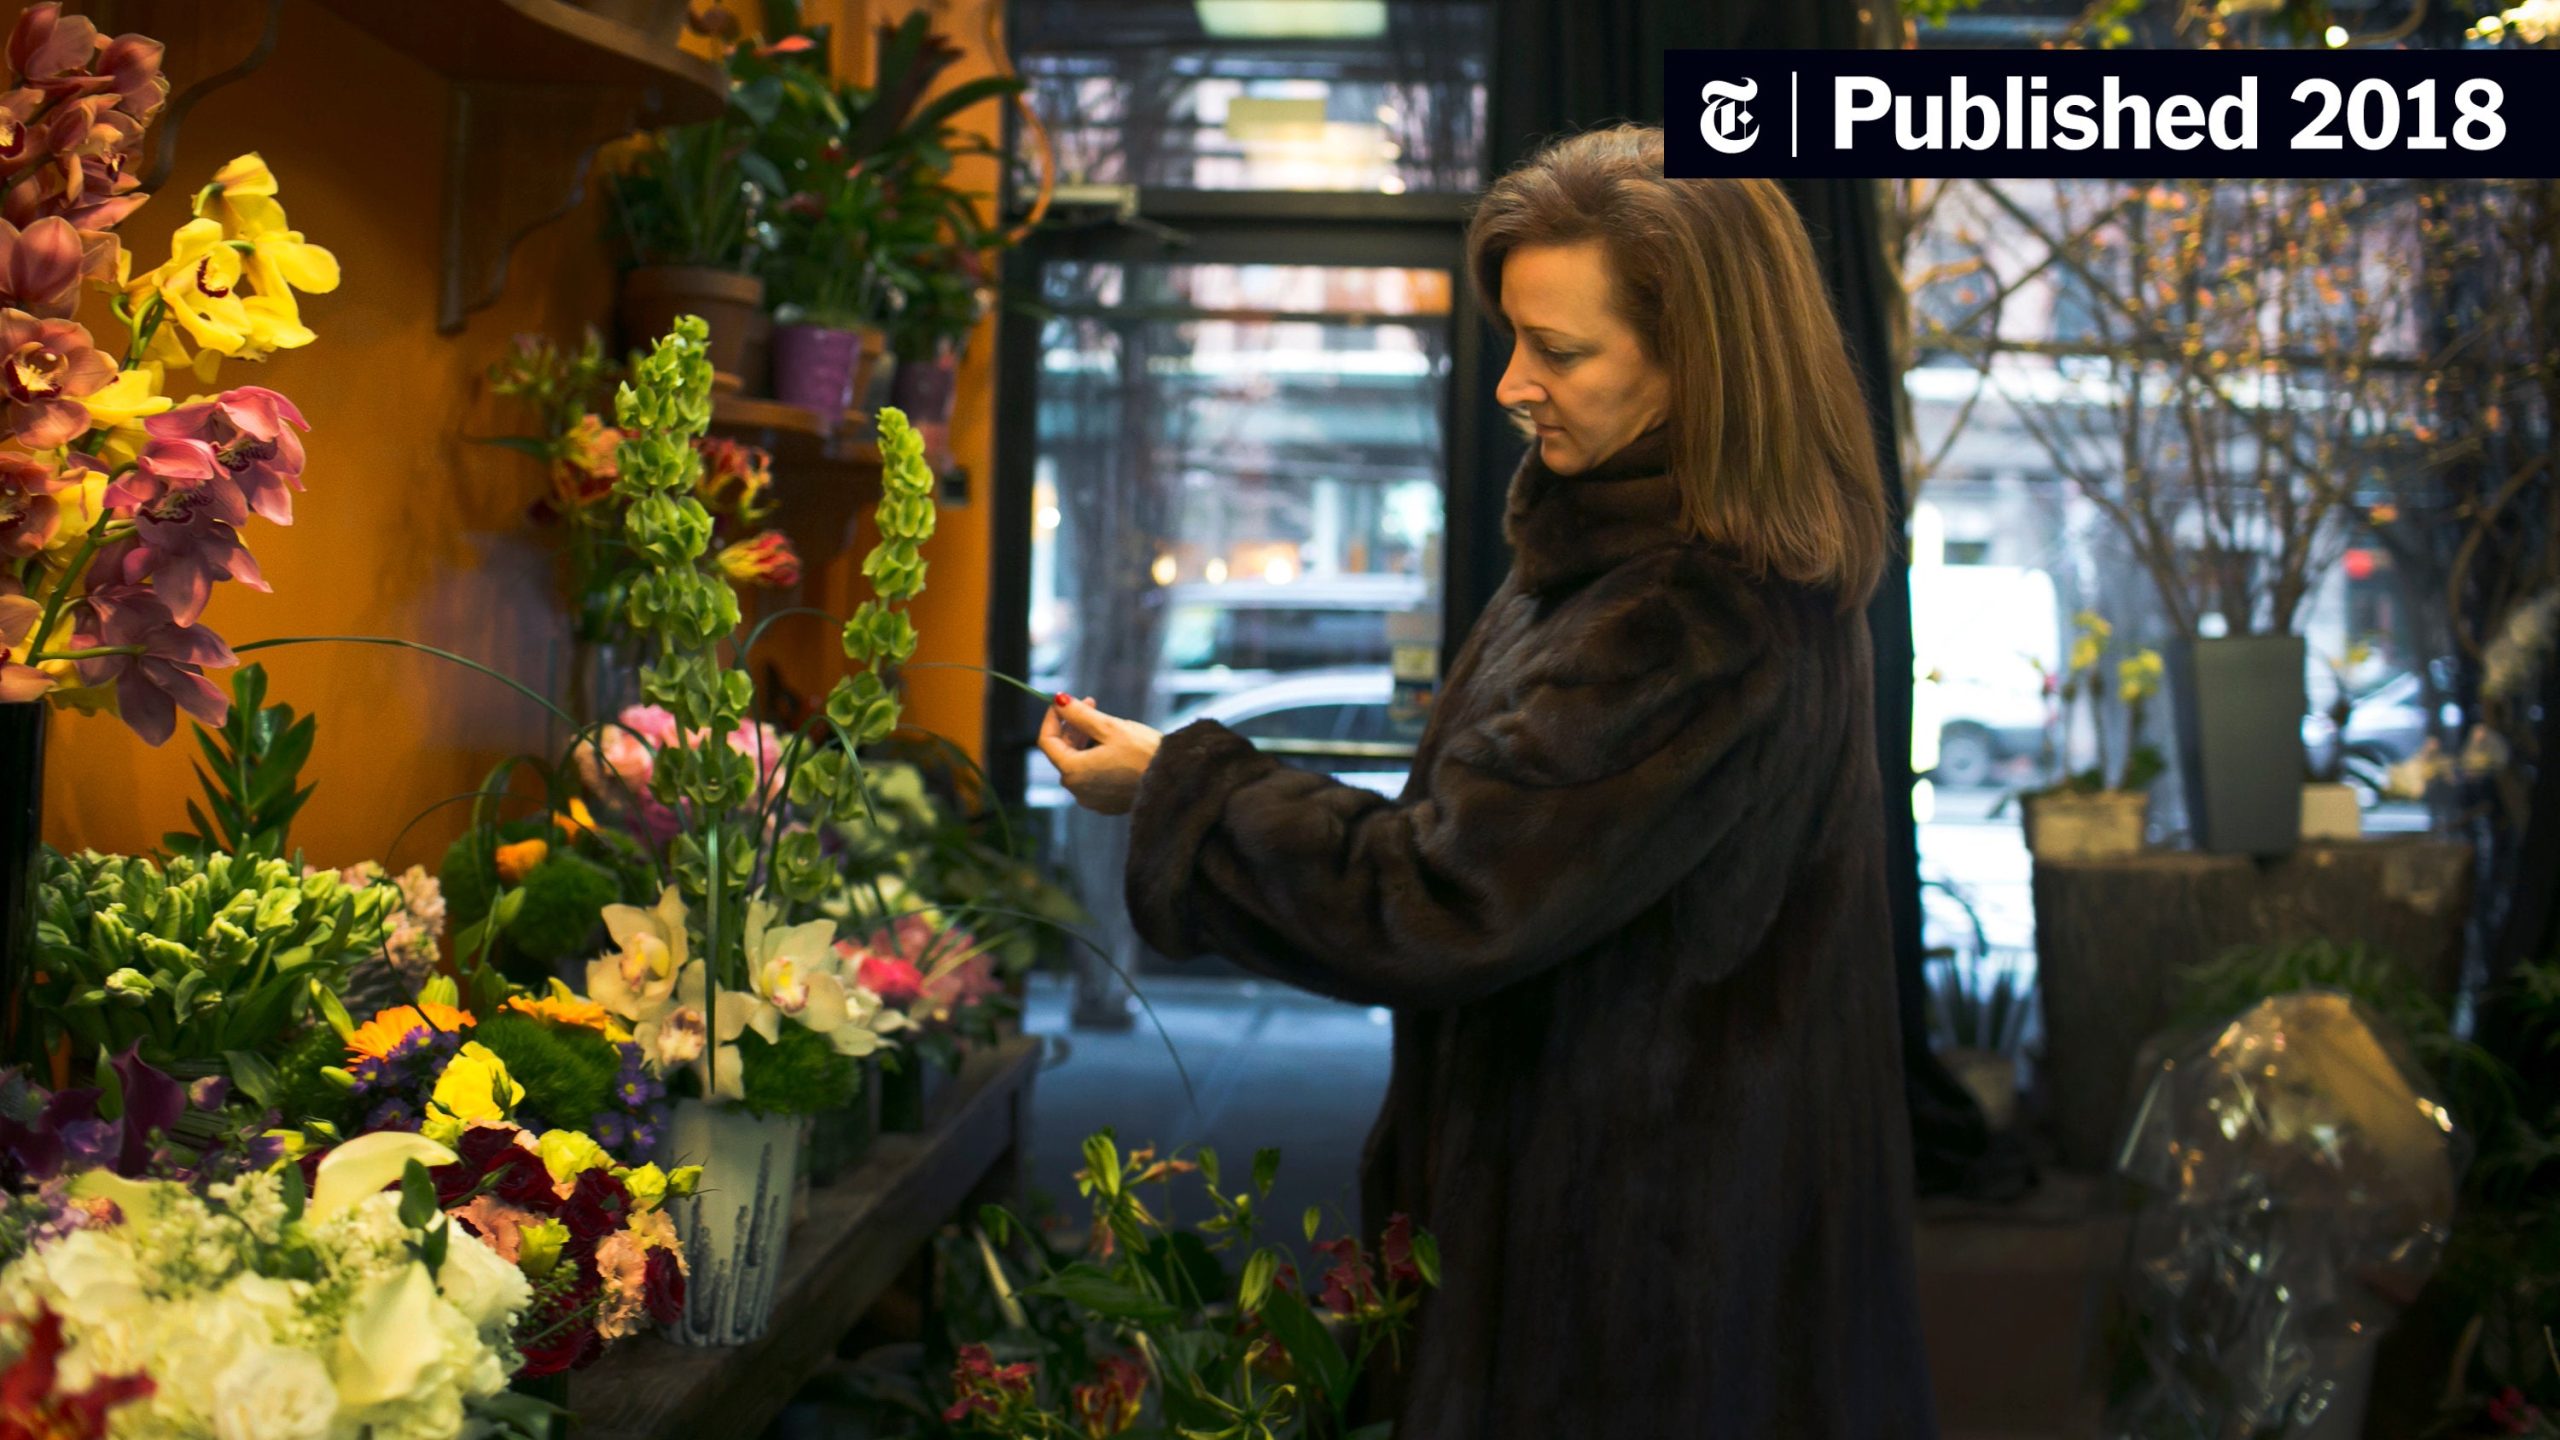 Flower Delivery Services in New York City